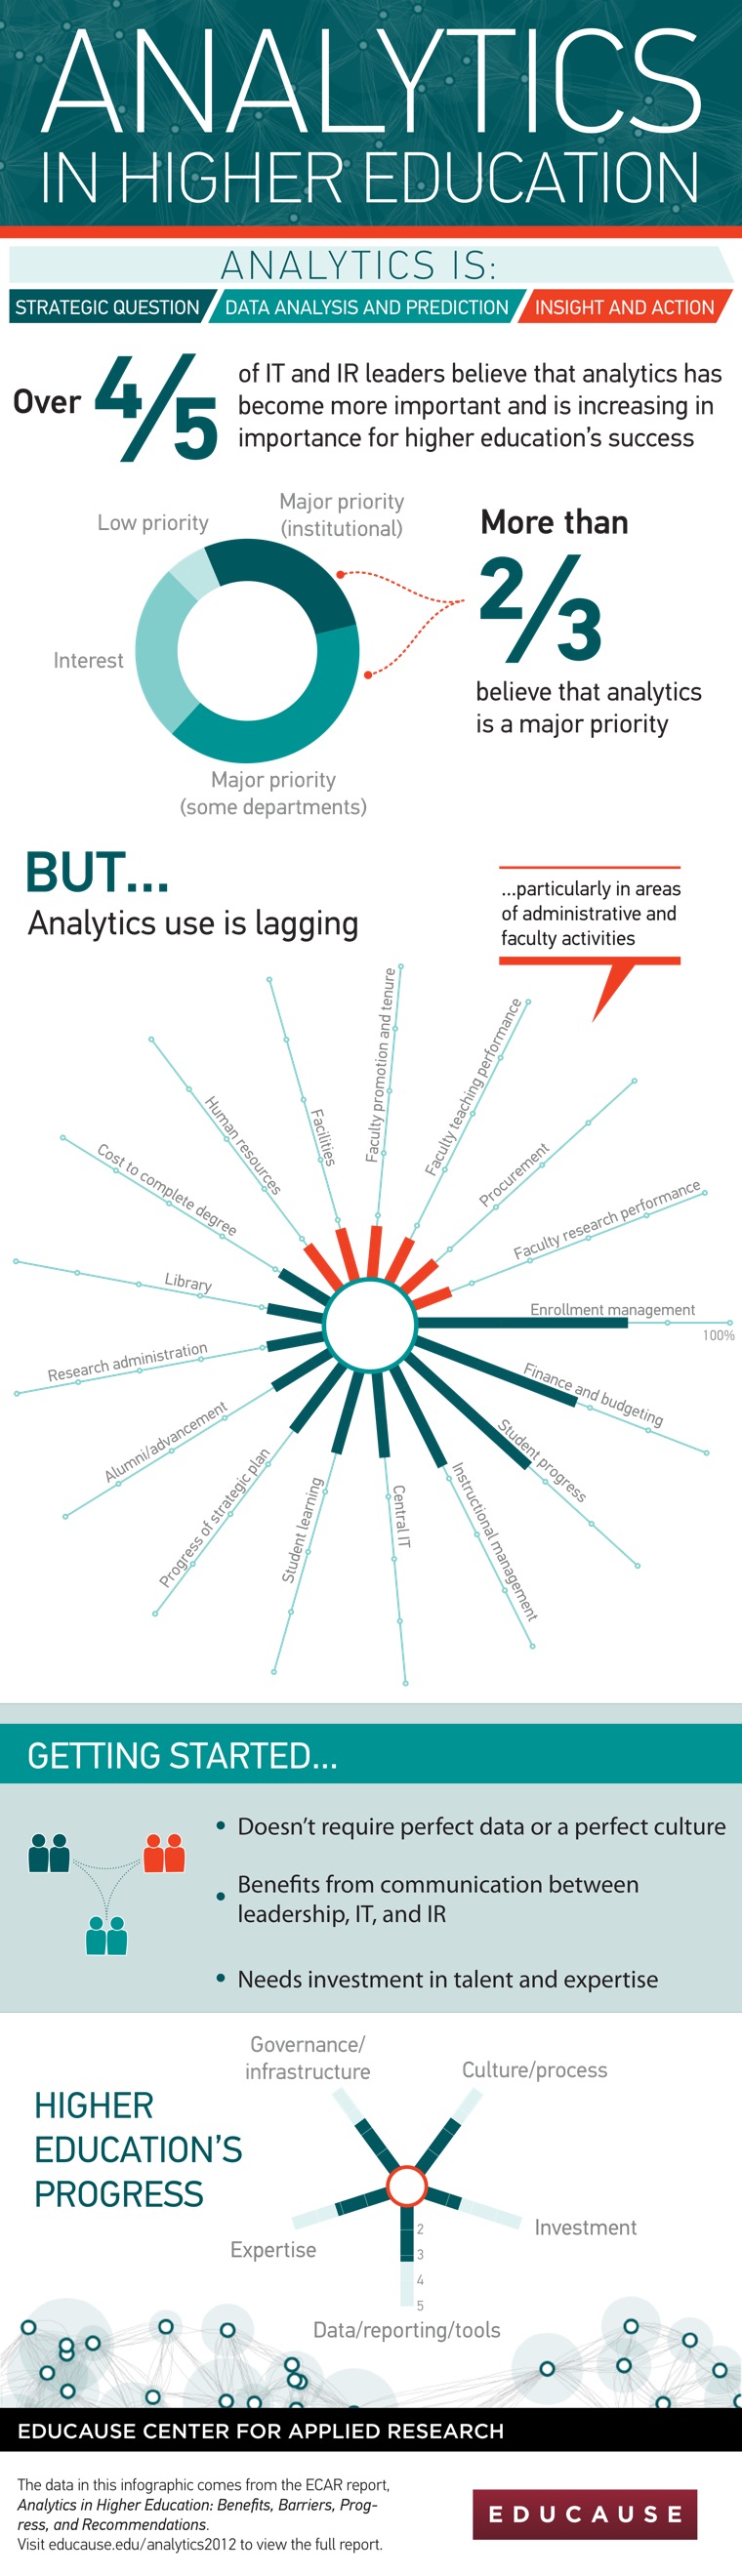 Analytics in Higher Education Infographic